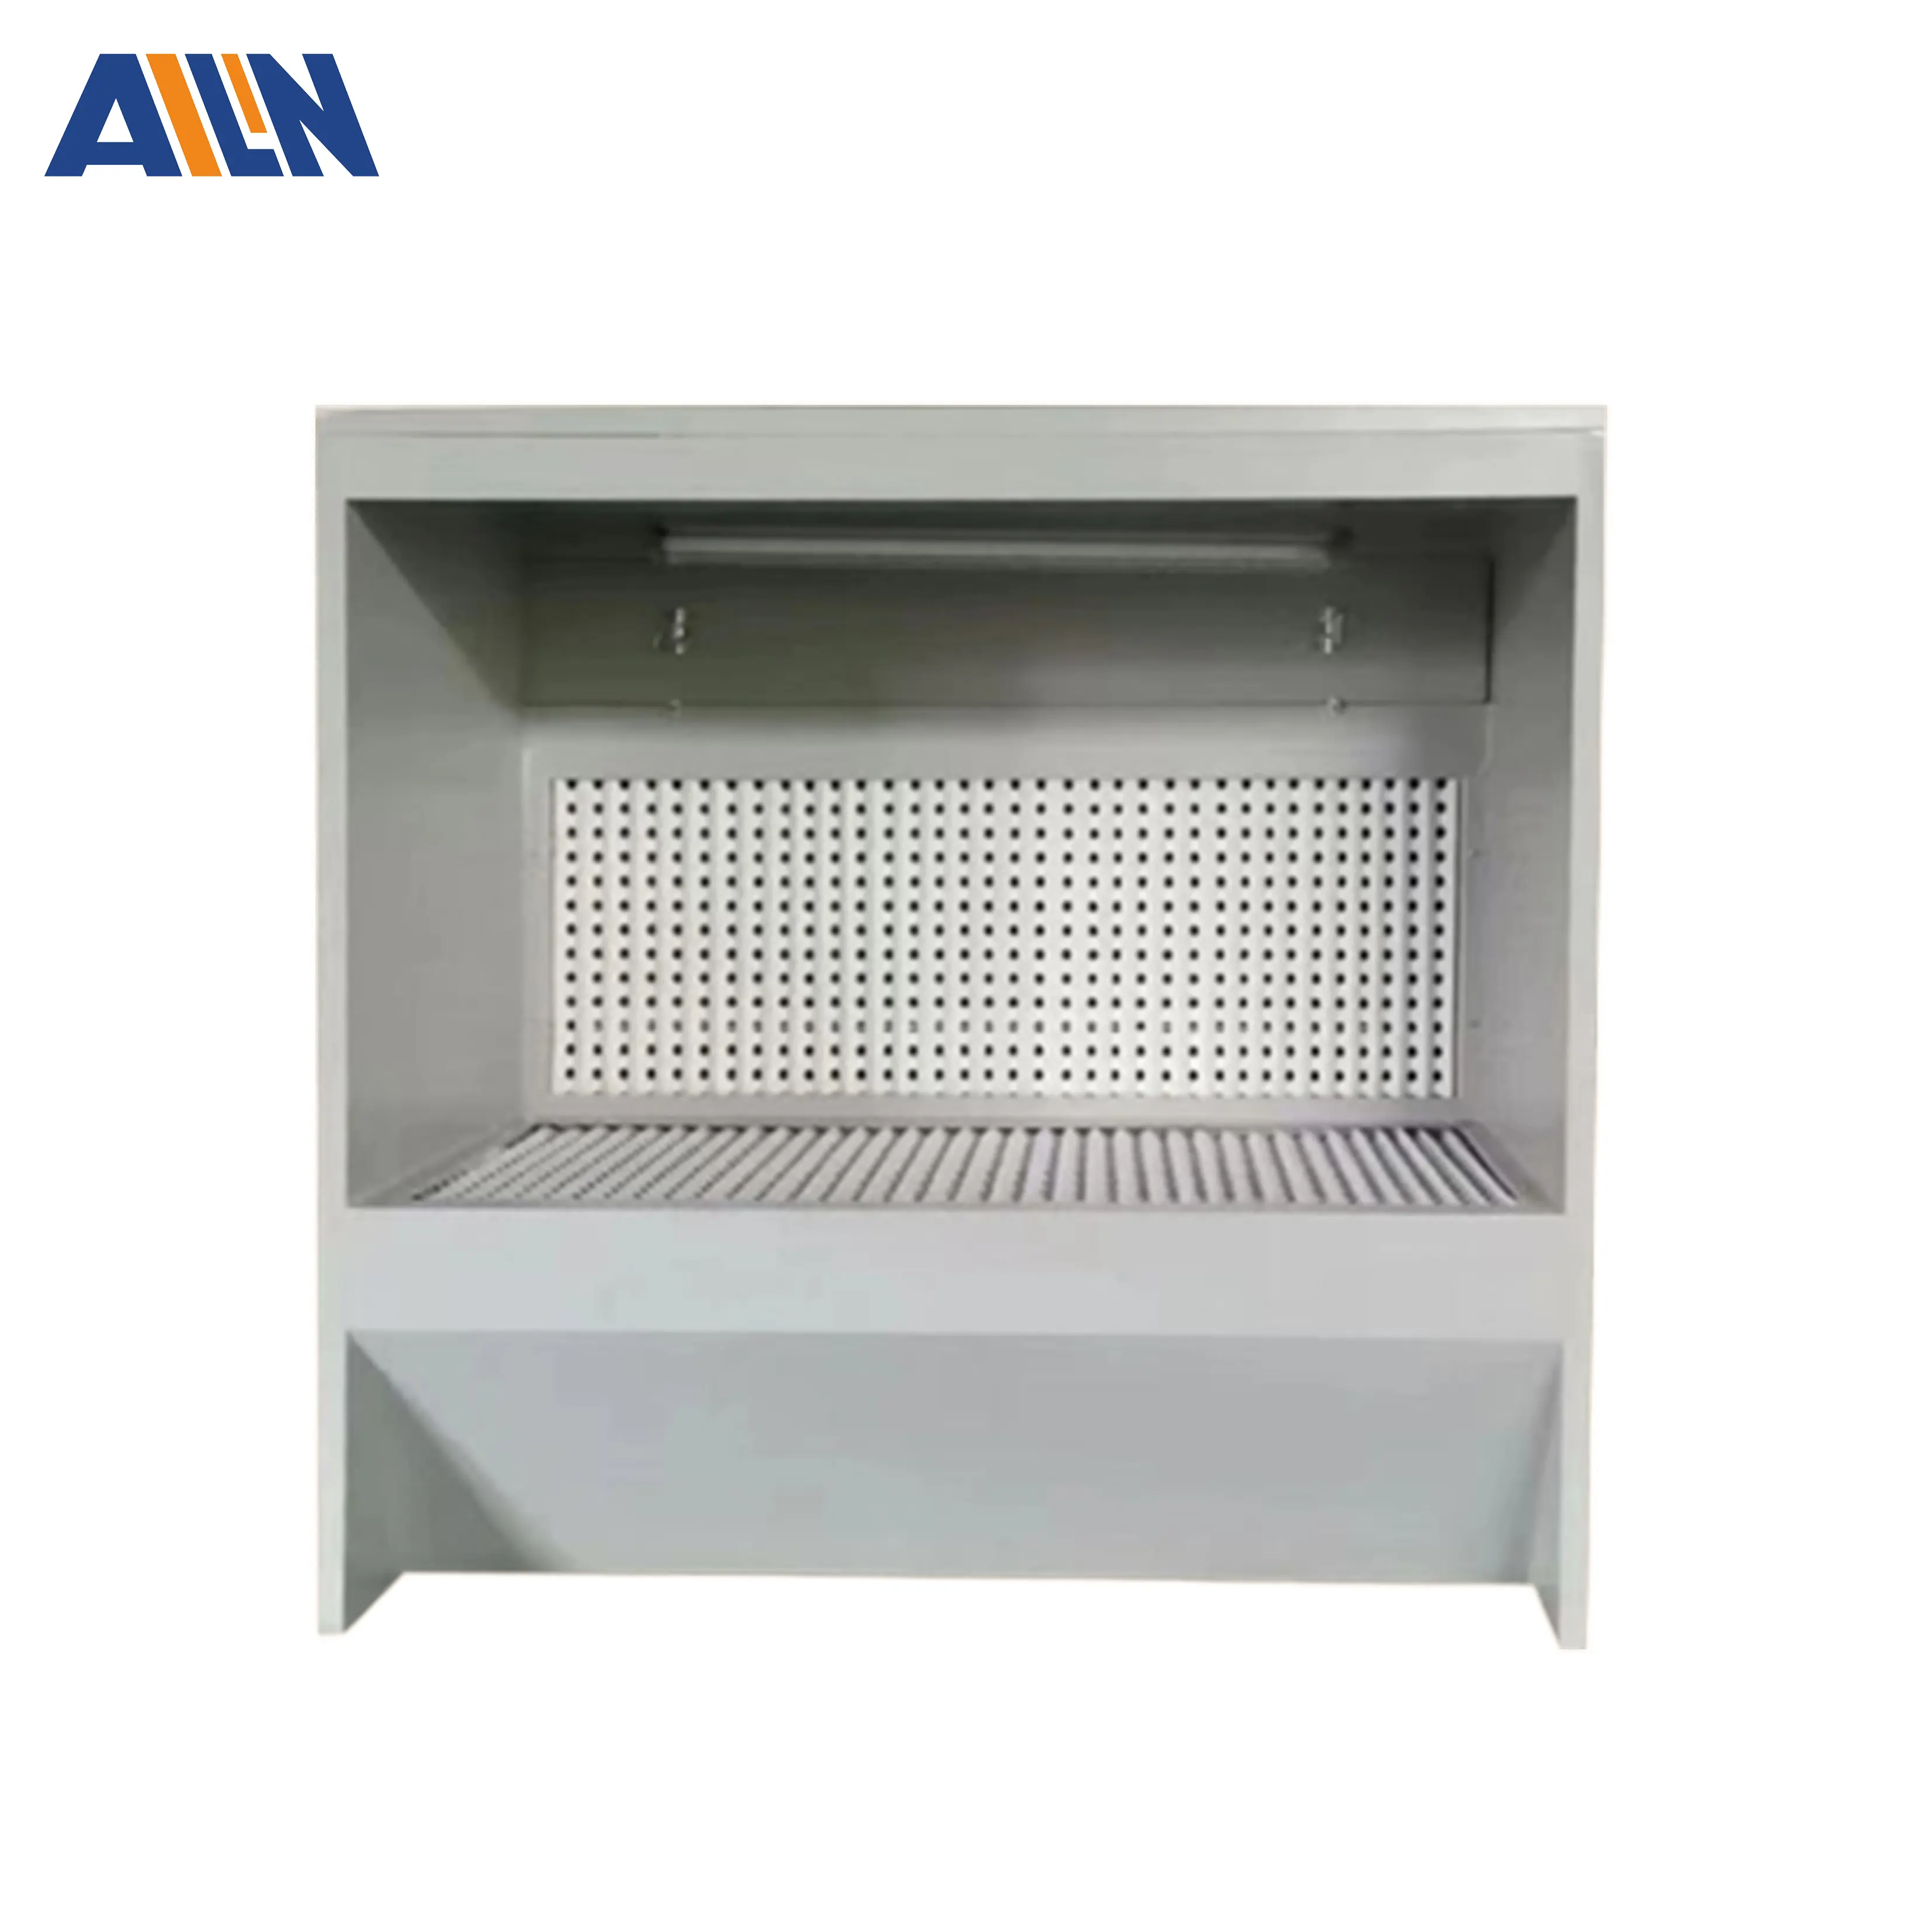 AILIN Spray Booth Liquid Painting Open Face Dry Filter Paint Booth Cabinet Paint Storage Metal Coating Machine